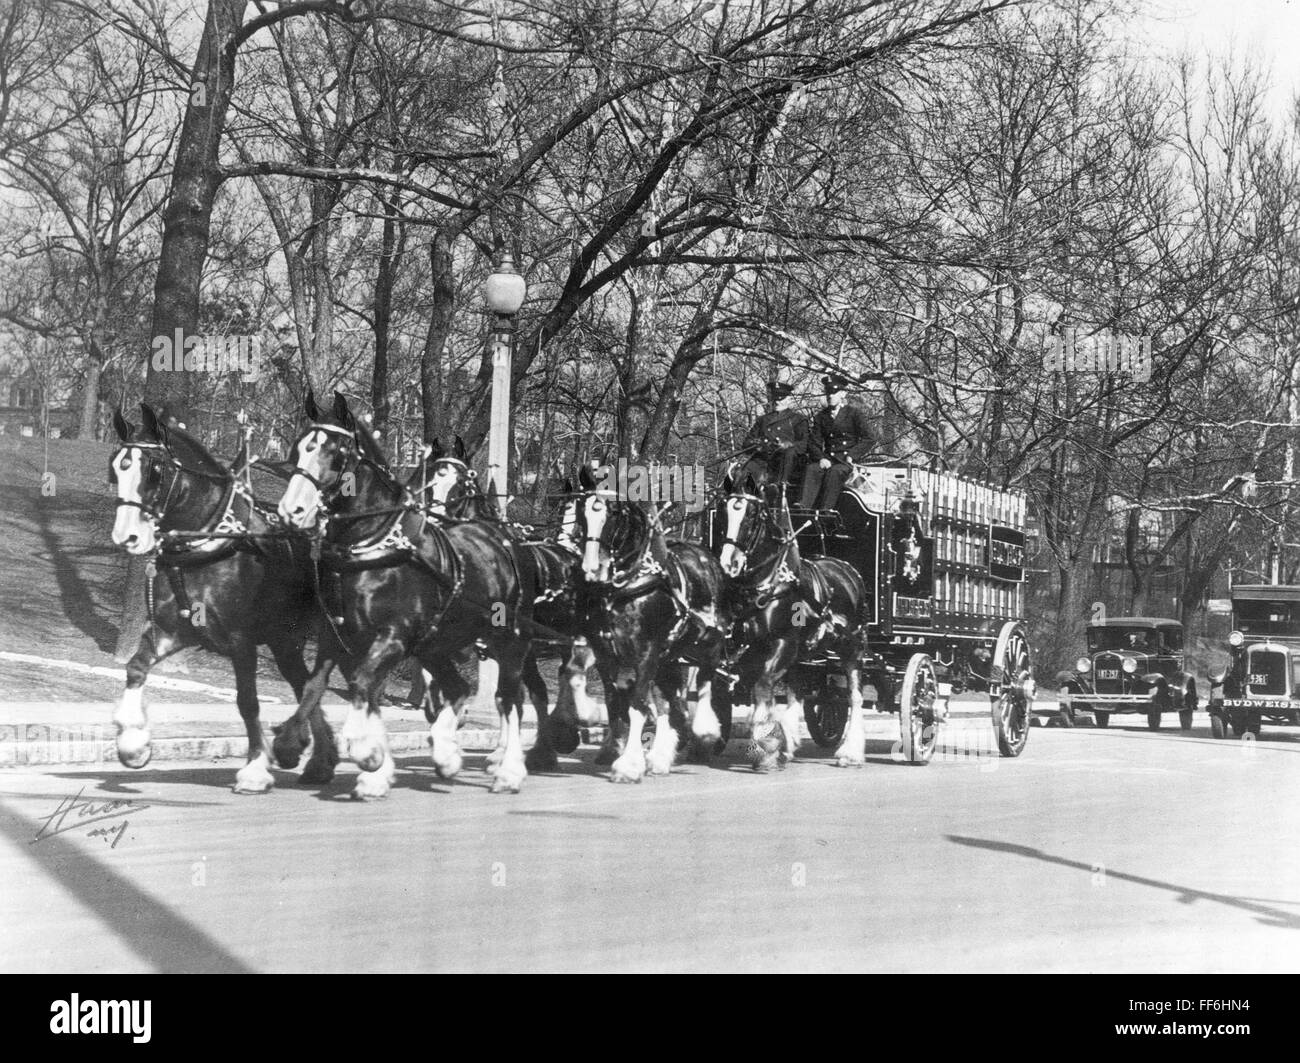 PROHIBITION REPEAL, 1933. /nAnheuser-Busch team on the streets of St. Louis, Mo., following the repeal of the 18th (Prohibition) Amendment, Dec. 1933. Stock Photo